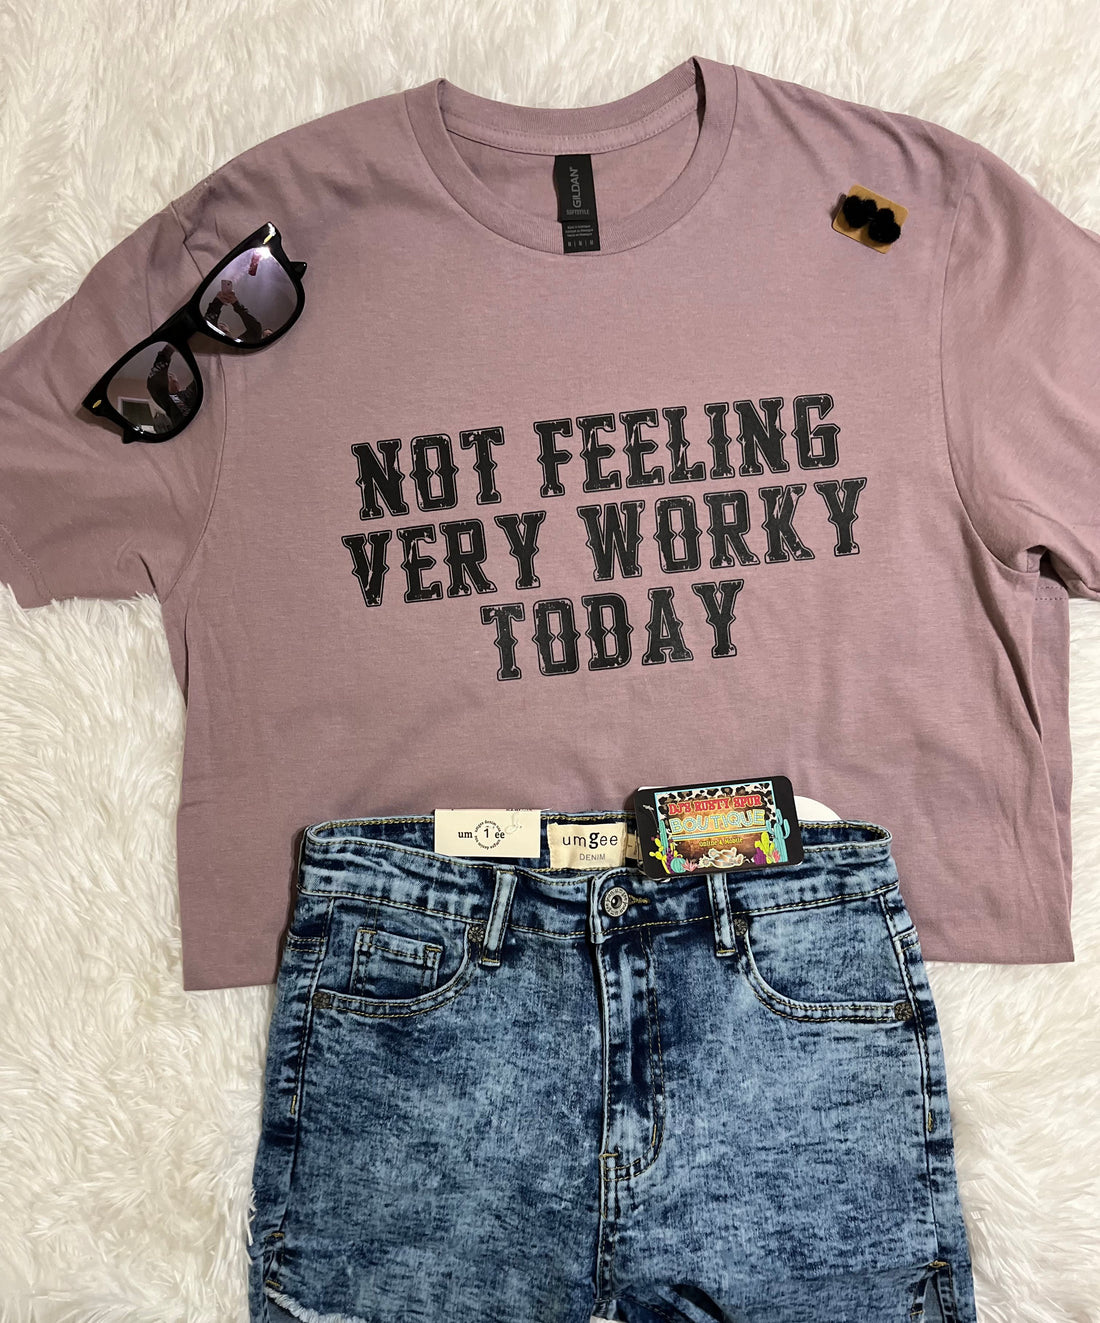 Not Feeling Very Worky Today! Graphic Tee